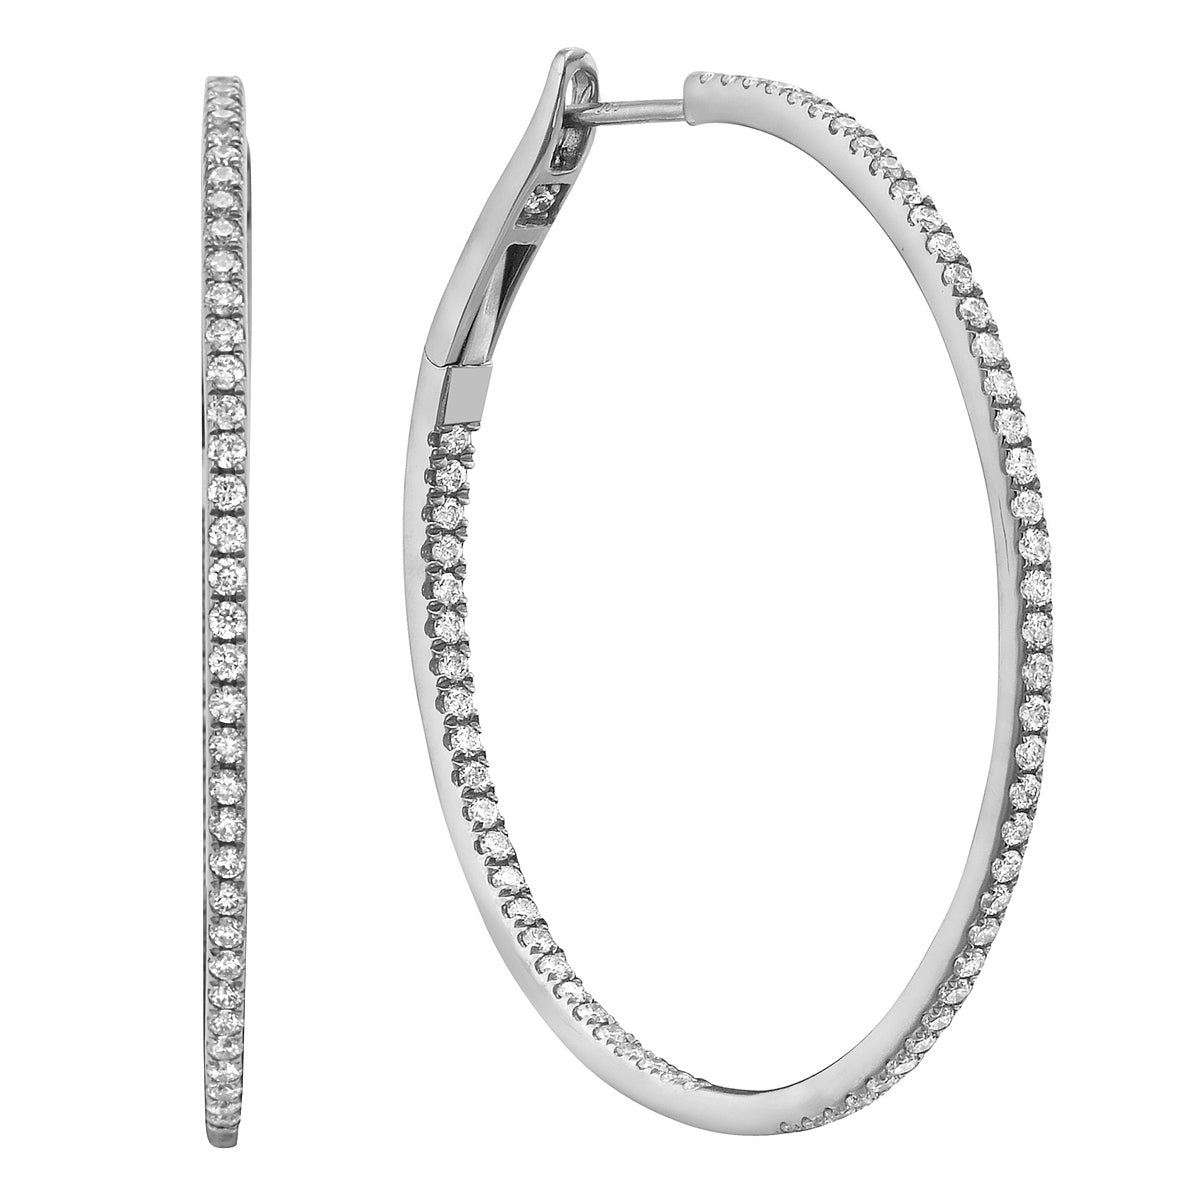 1.5 in White Gold Insdie and Out Diamond Hoop Earrings